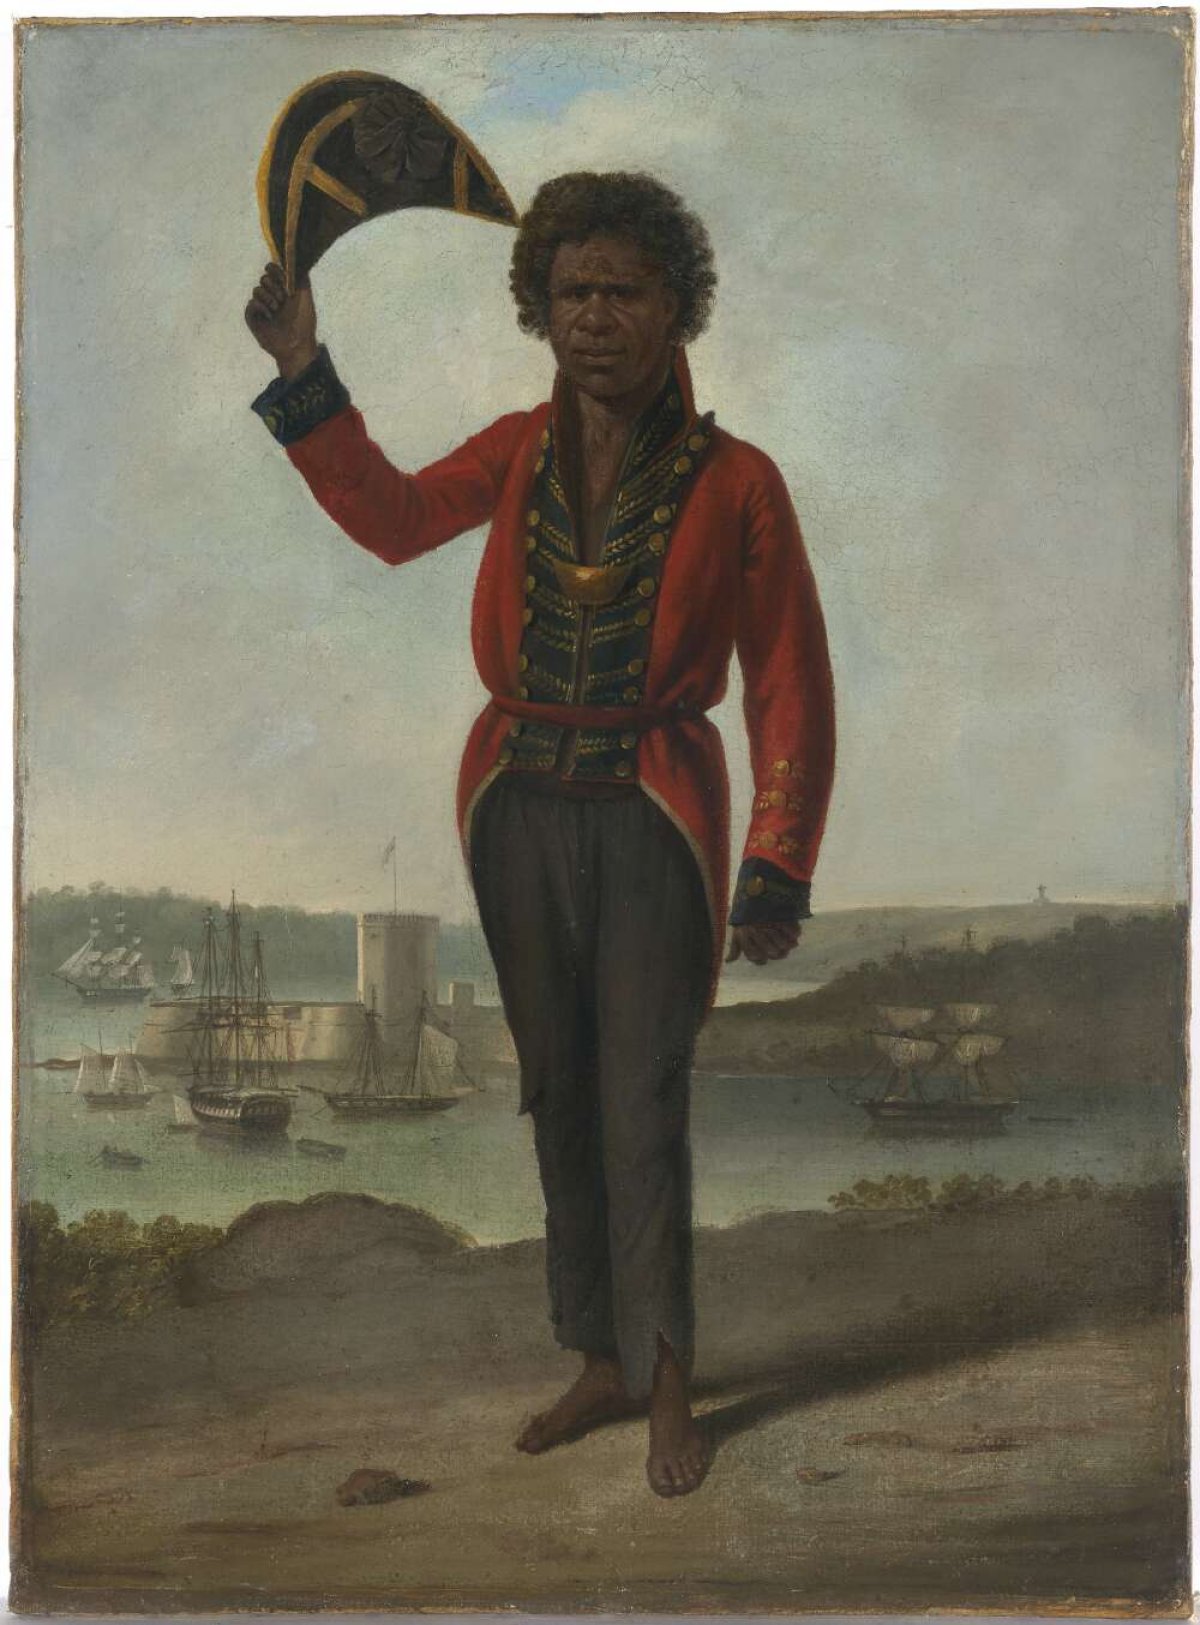 A portrait of a man. He has dark skin and hair. He is an Australian Indigenous man and is wearing a European style officers coat and trousers. His trousers are tattered at the cuffs. He is holding a tricorn hat in the air. In the background sailing ships can be see on the harbour. A large fort can be seen on a spit of land.